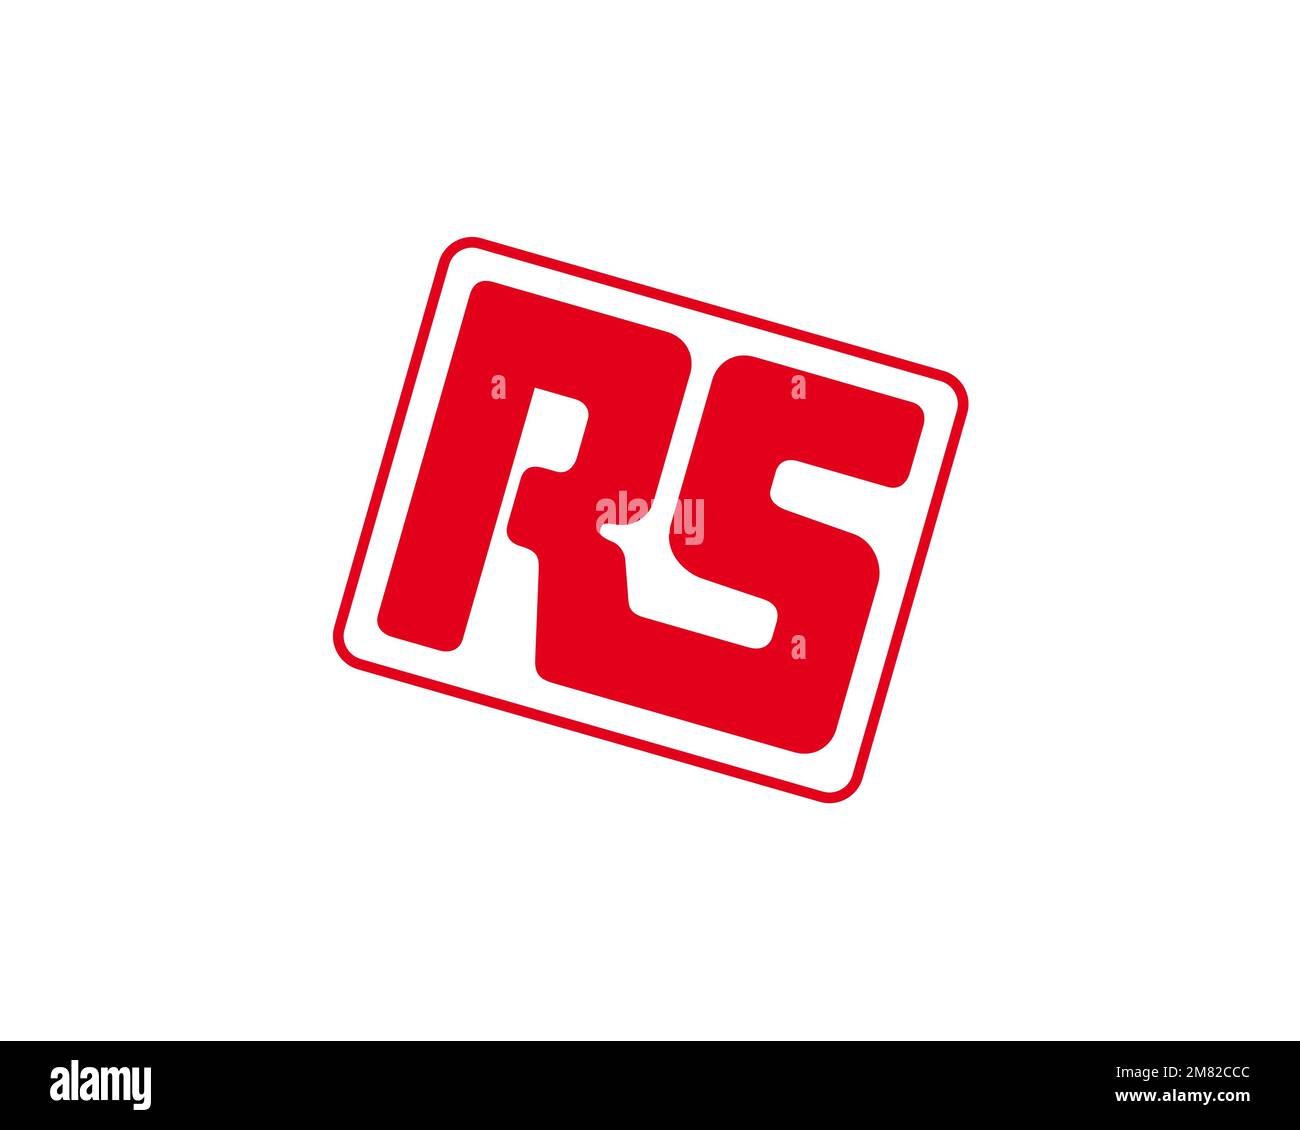 https://c8.alamy.com/comp/2M82CCC/rs-components-rotated-logo-white-background-b-2M82CCC.jpg